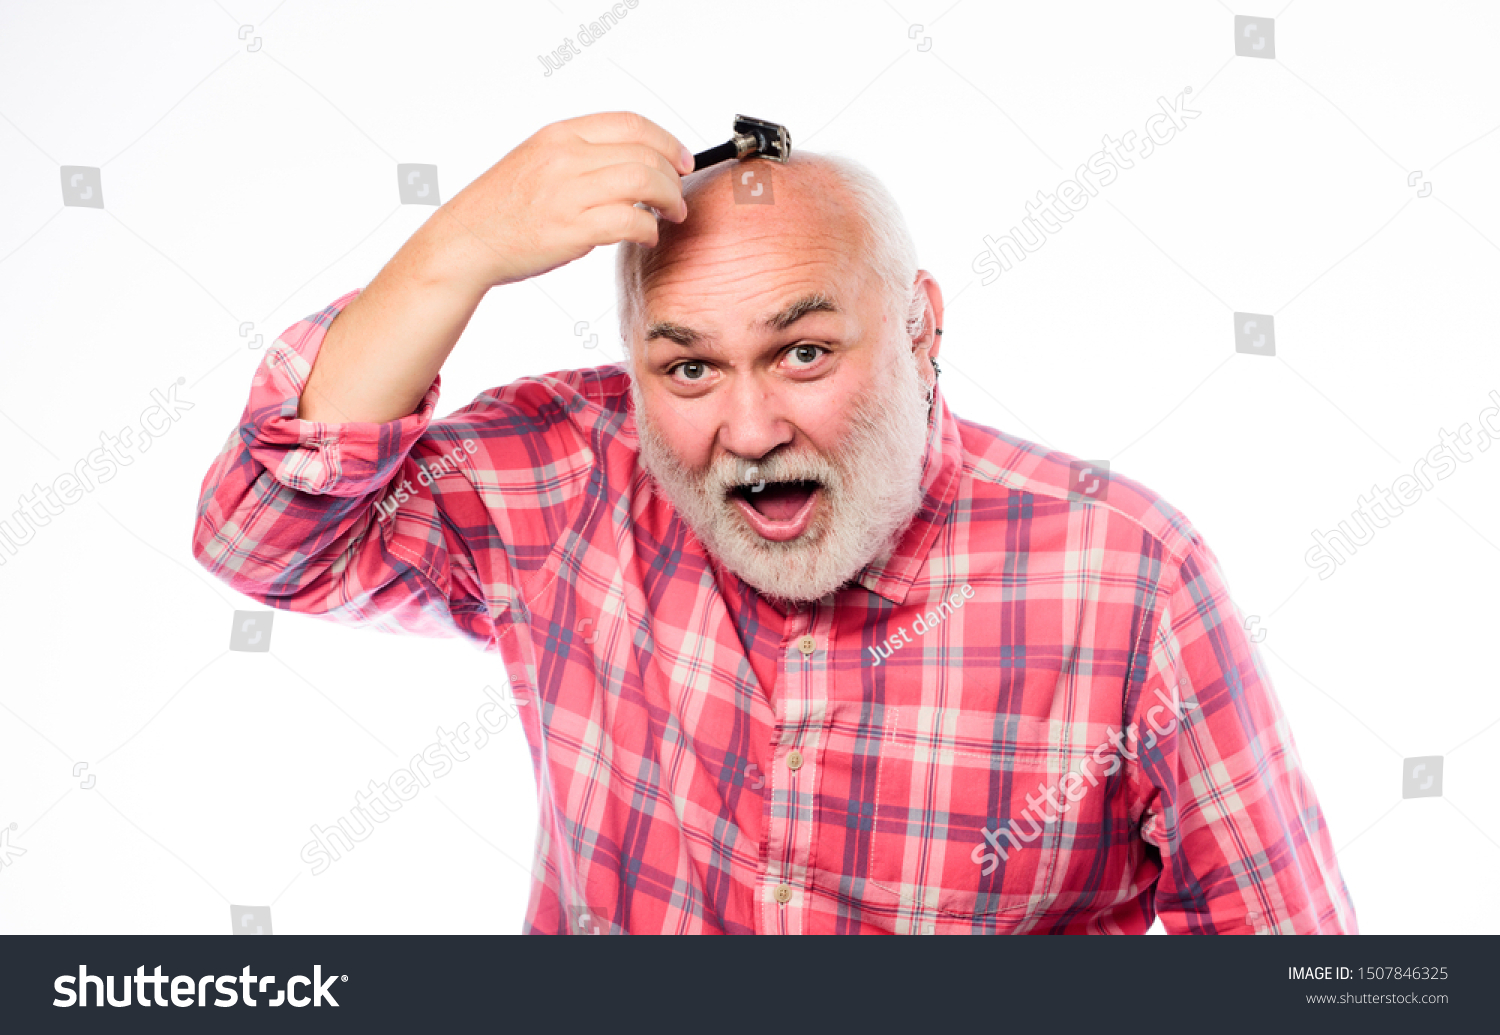 Mr. Expertise. unshaven old man has moustache and beard. cut and brush hair. mature bearded man isolated on white. barbershop concept. shaving accessories. shaving razor blade tool kit. #1507846325